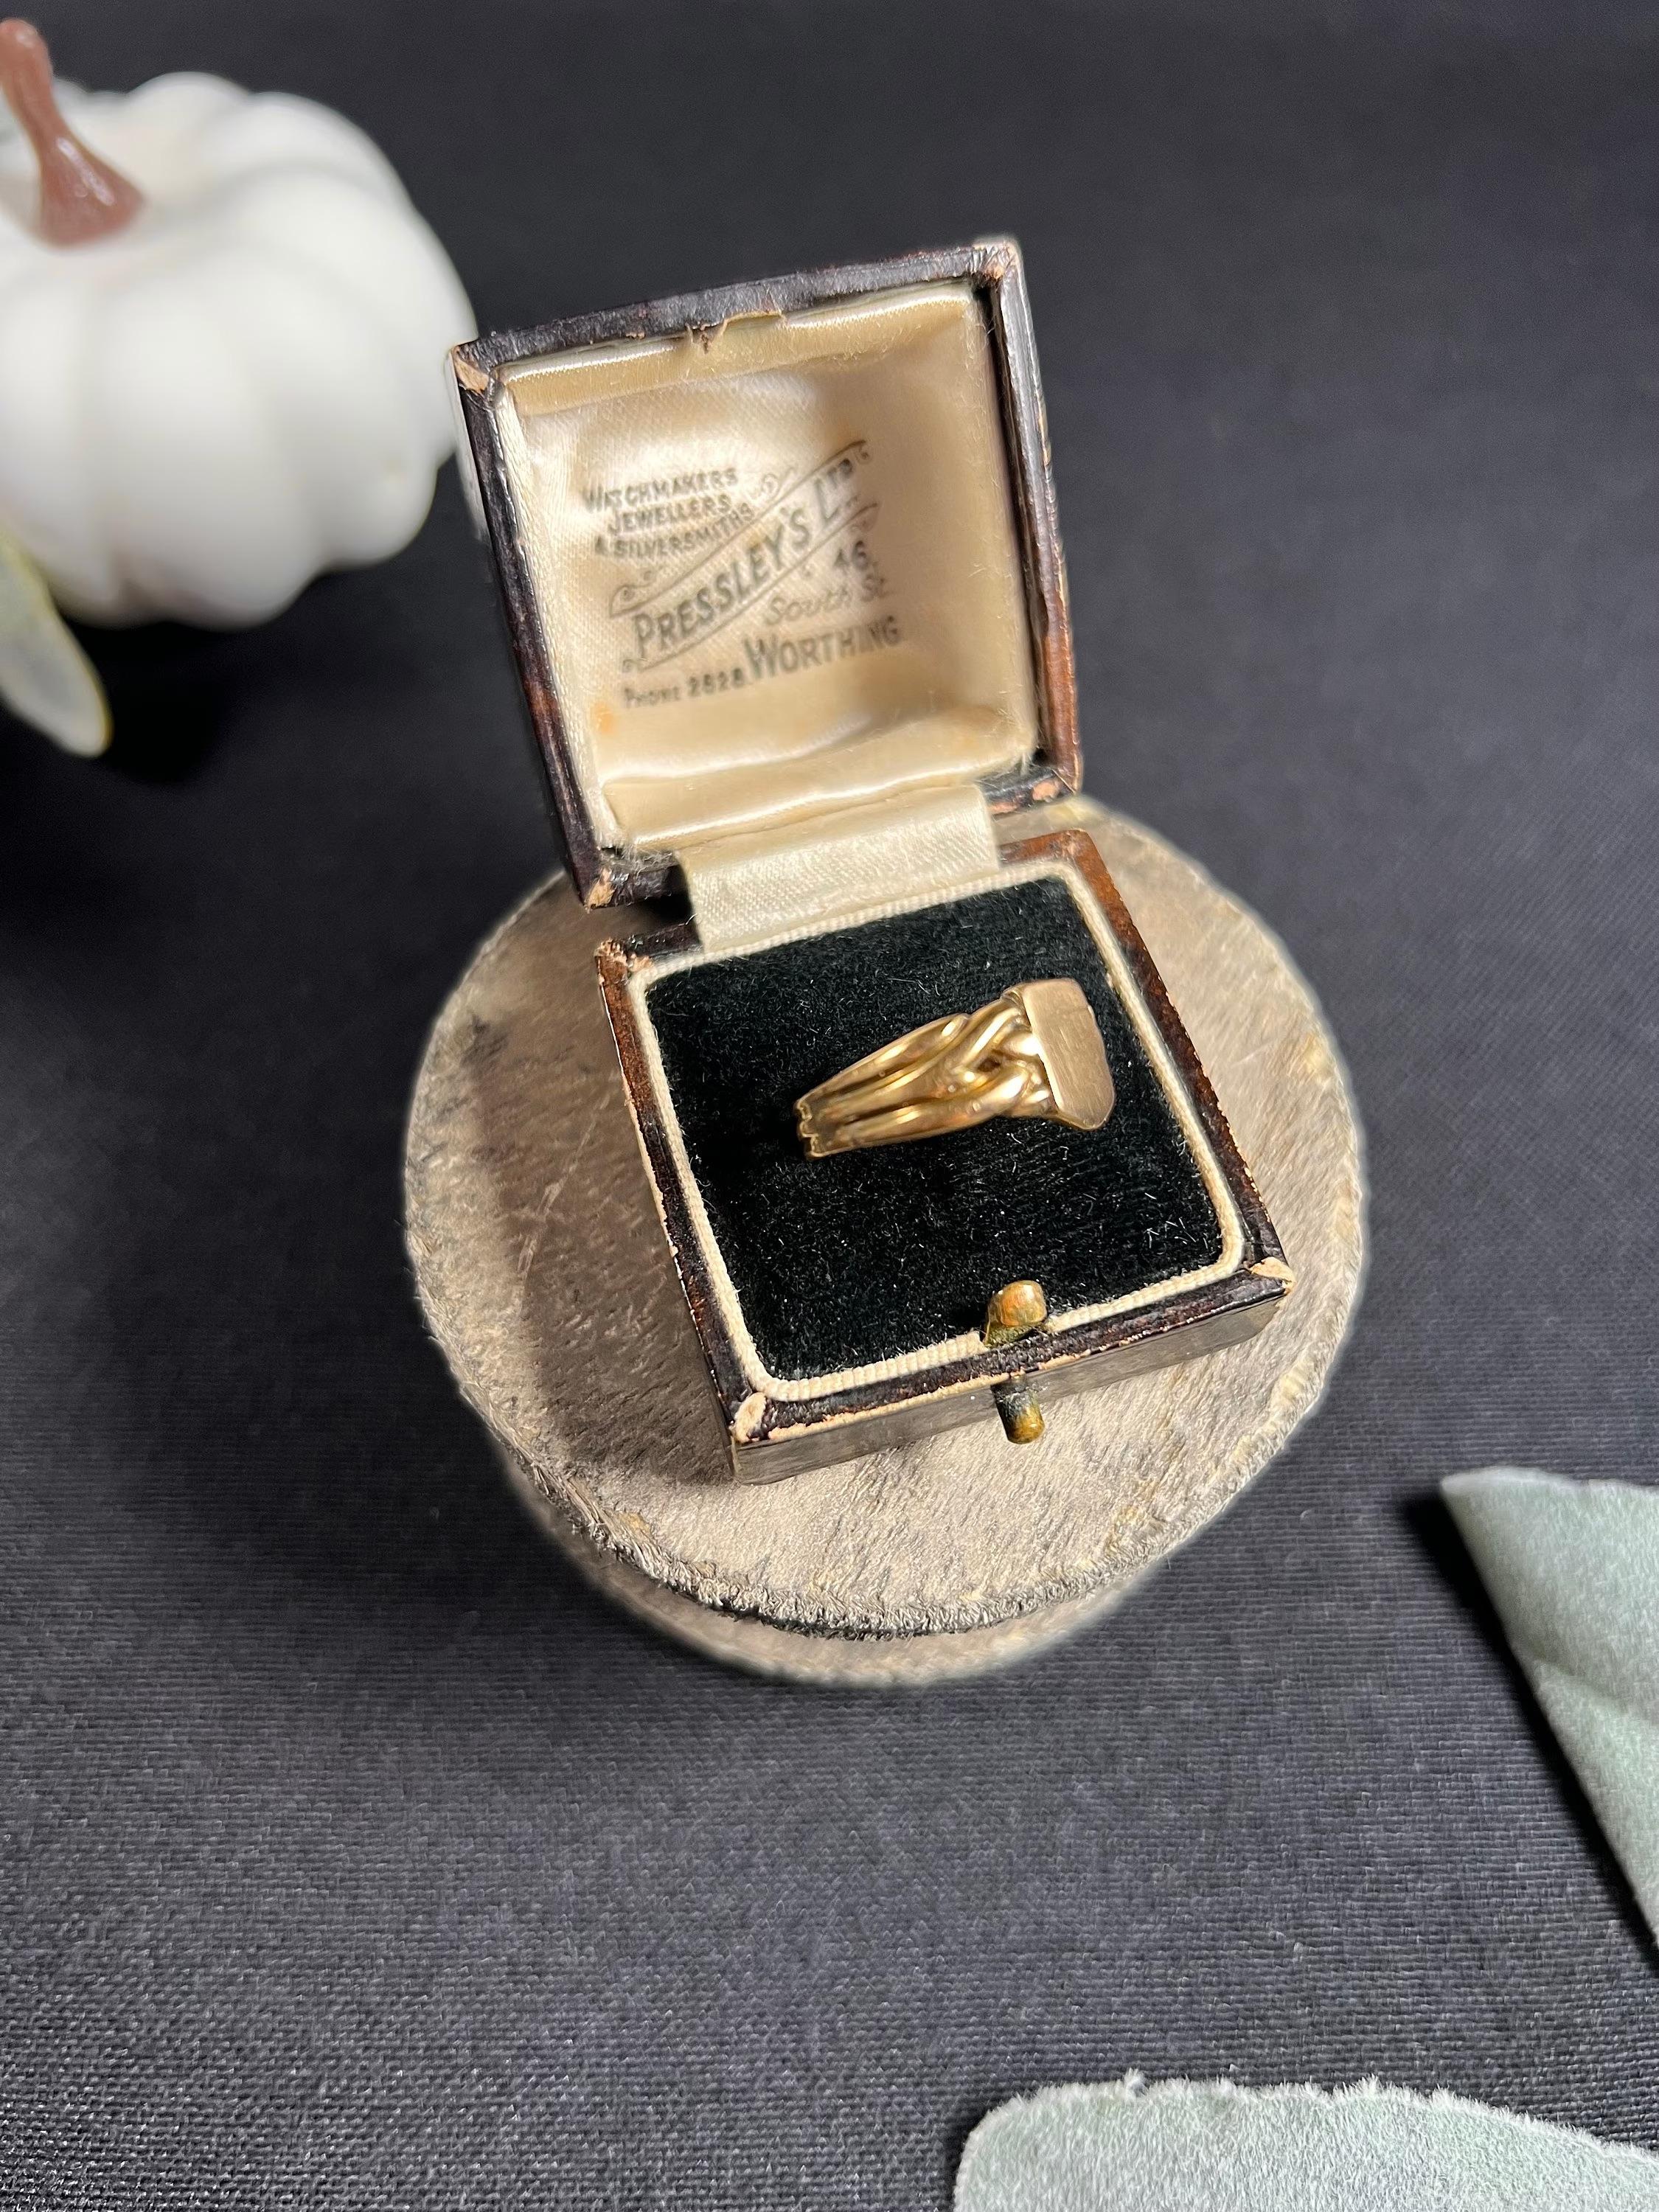 Antique Signet Ring

18ct Gold

Hallmarked Birmingham 1889

This antique signet ring is a true masterpiece in 18ct yellow gold. It features a stunning shield-shaped design that is typical of Victorian-era jewellery. The woven shoulders add an